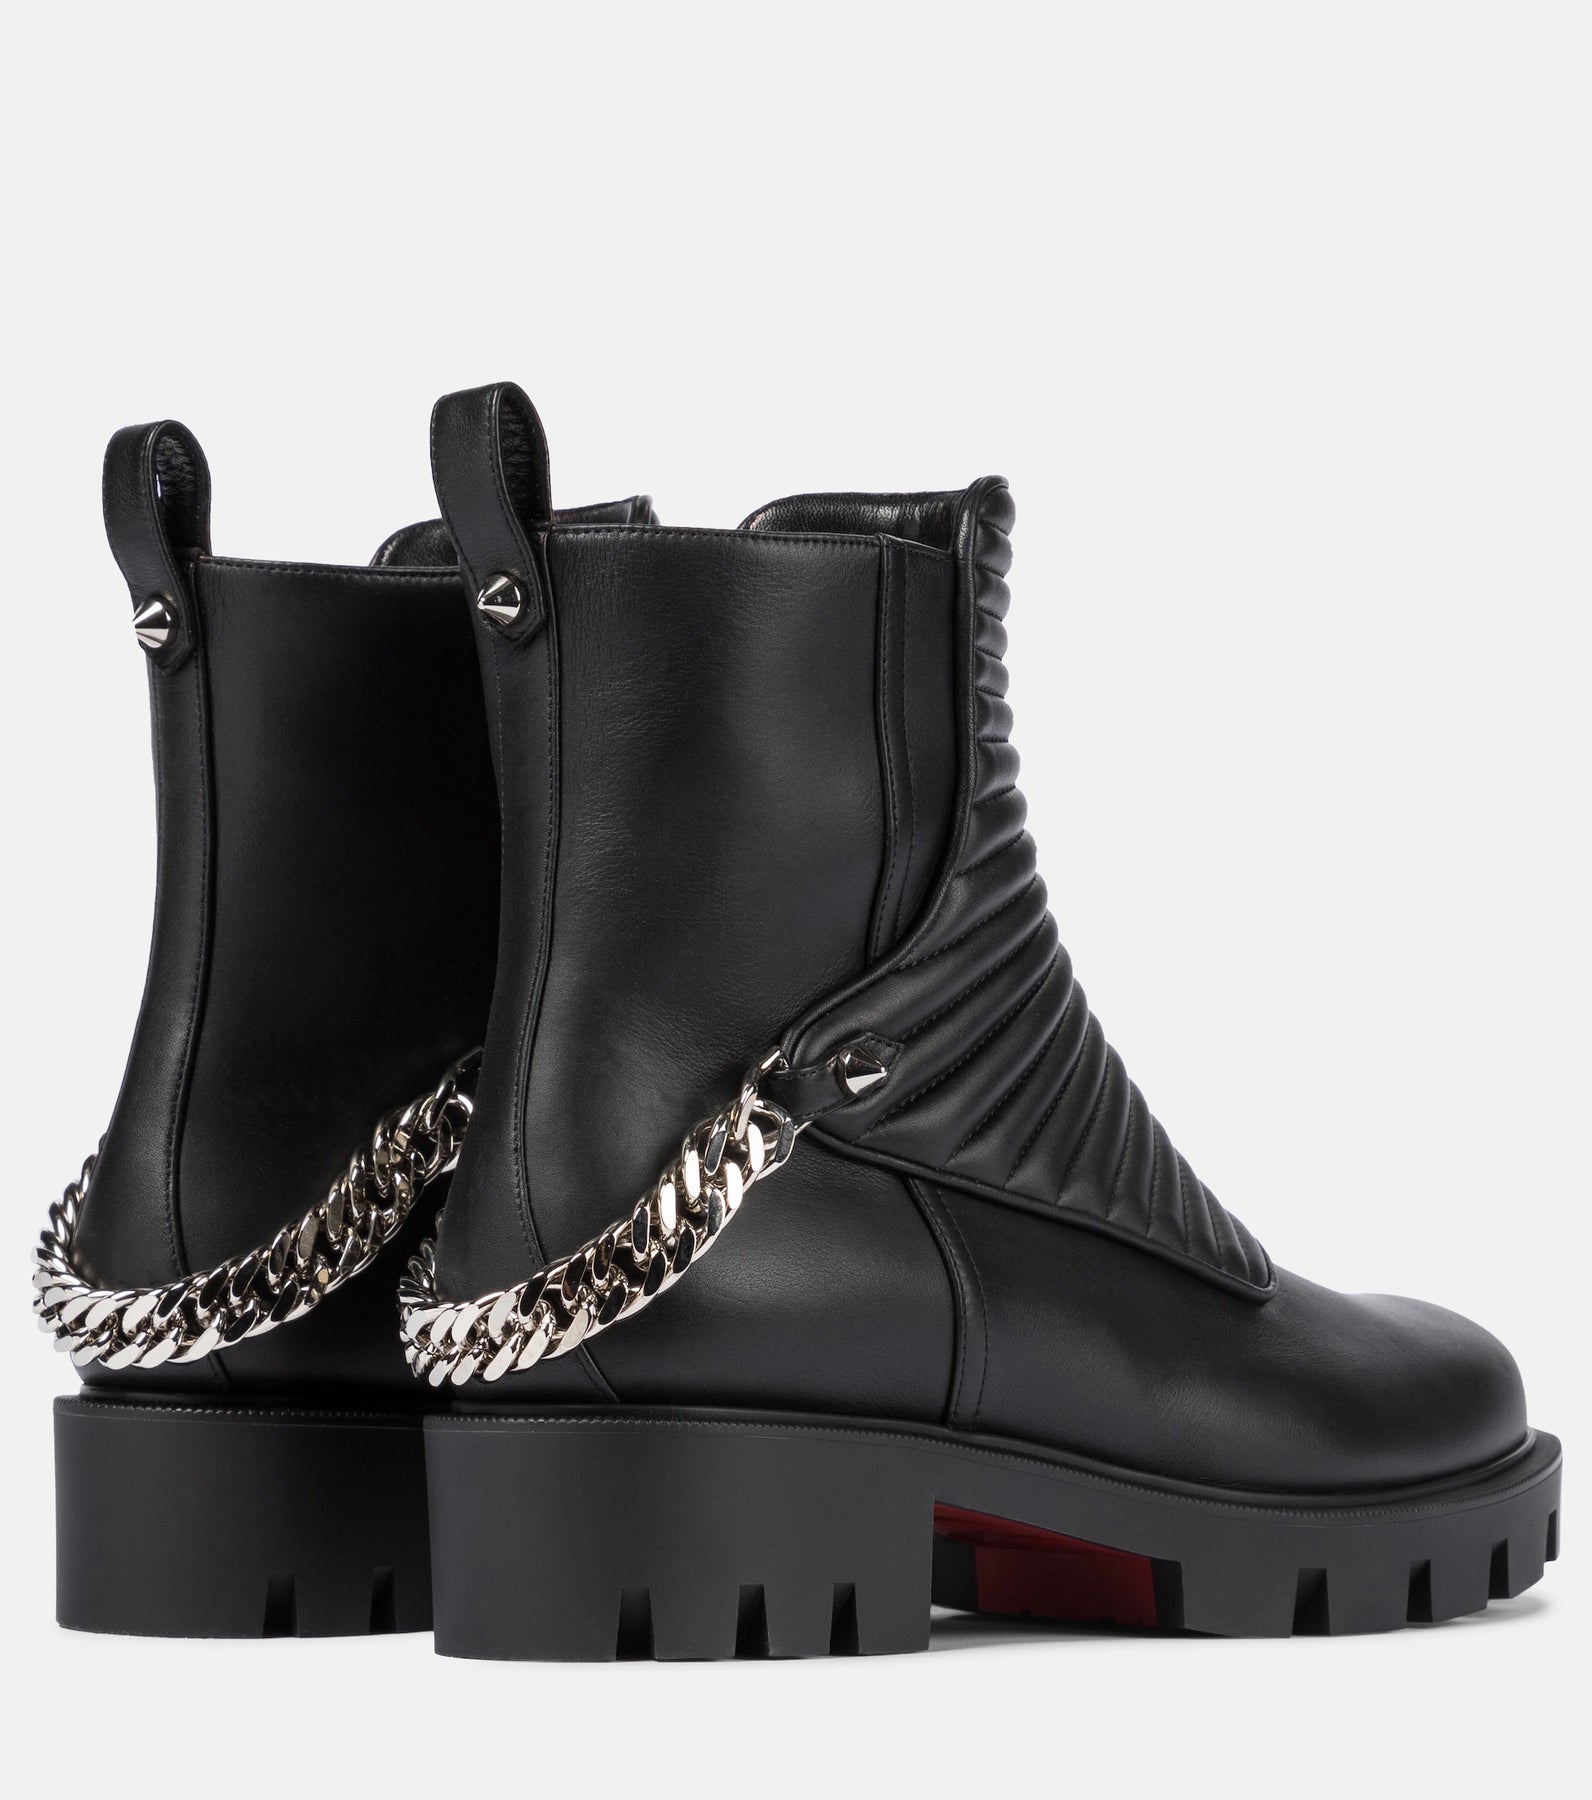 Christian Louboutin Maddie Max Black Ankle Boots New